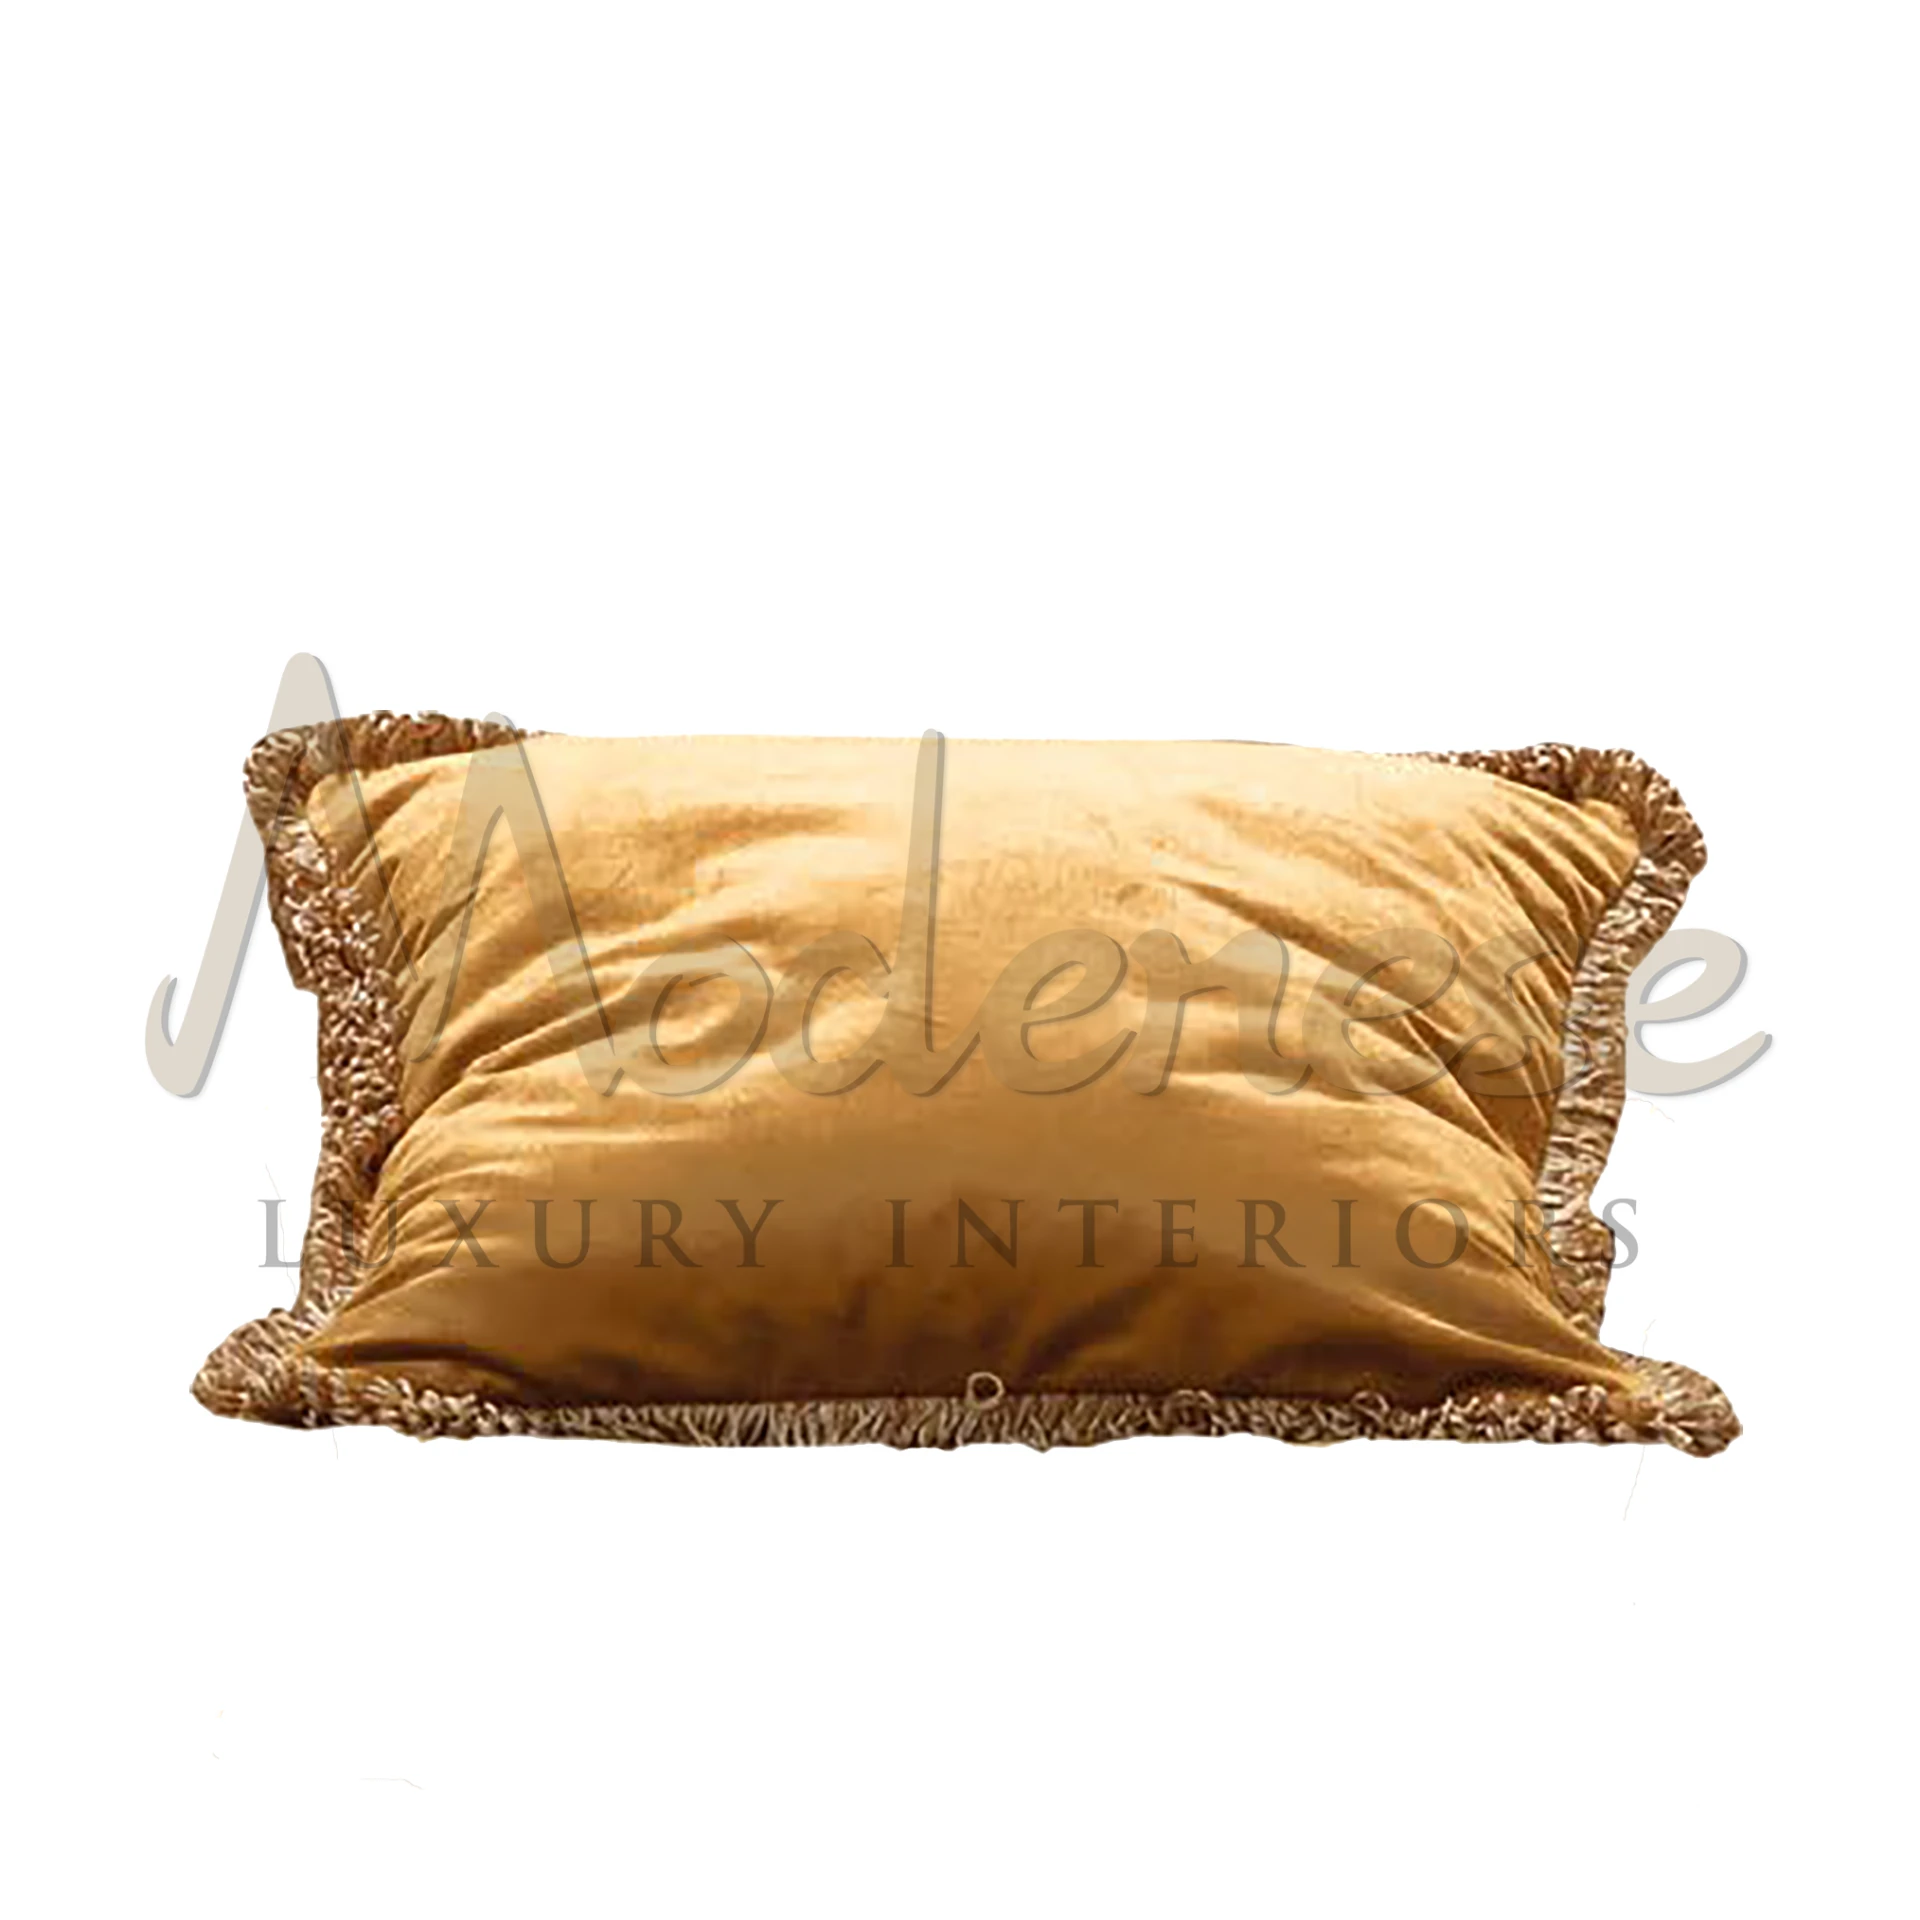 Luxurious Victorian Brown Pillow in a deep, rich brown shade, representing high-quality Italian textiles and timeless elegance.